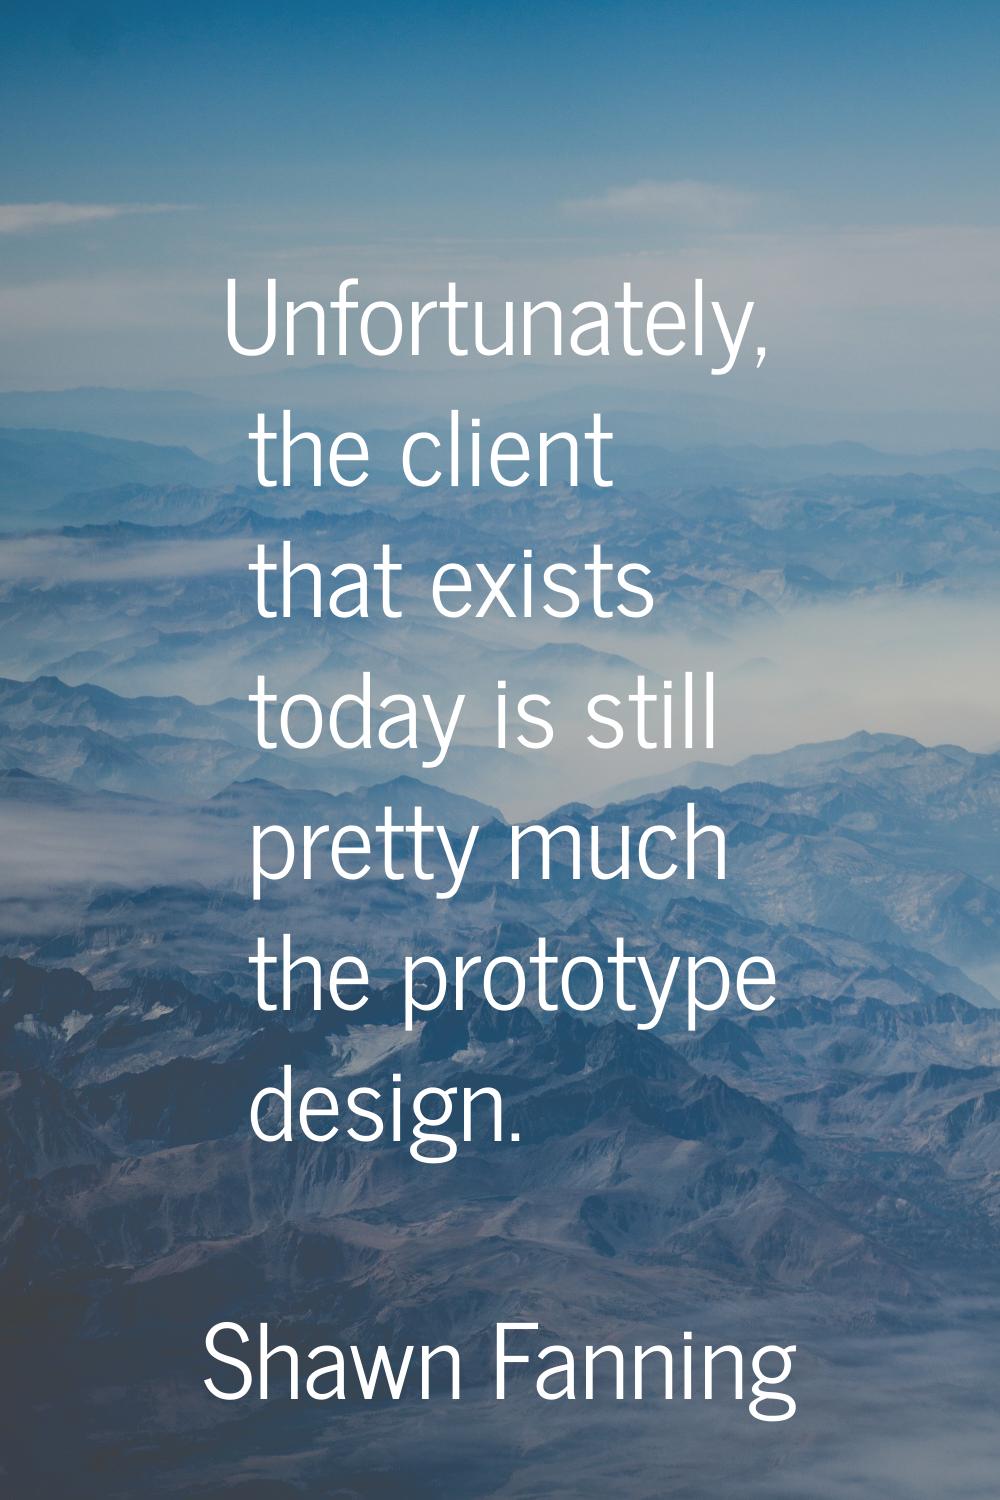 Unfortunately, the client that exists today is still pretty much the prototype design.